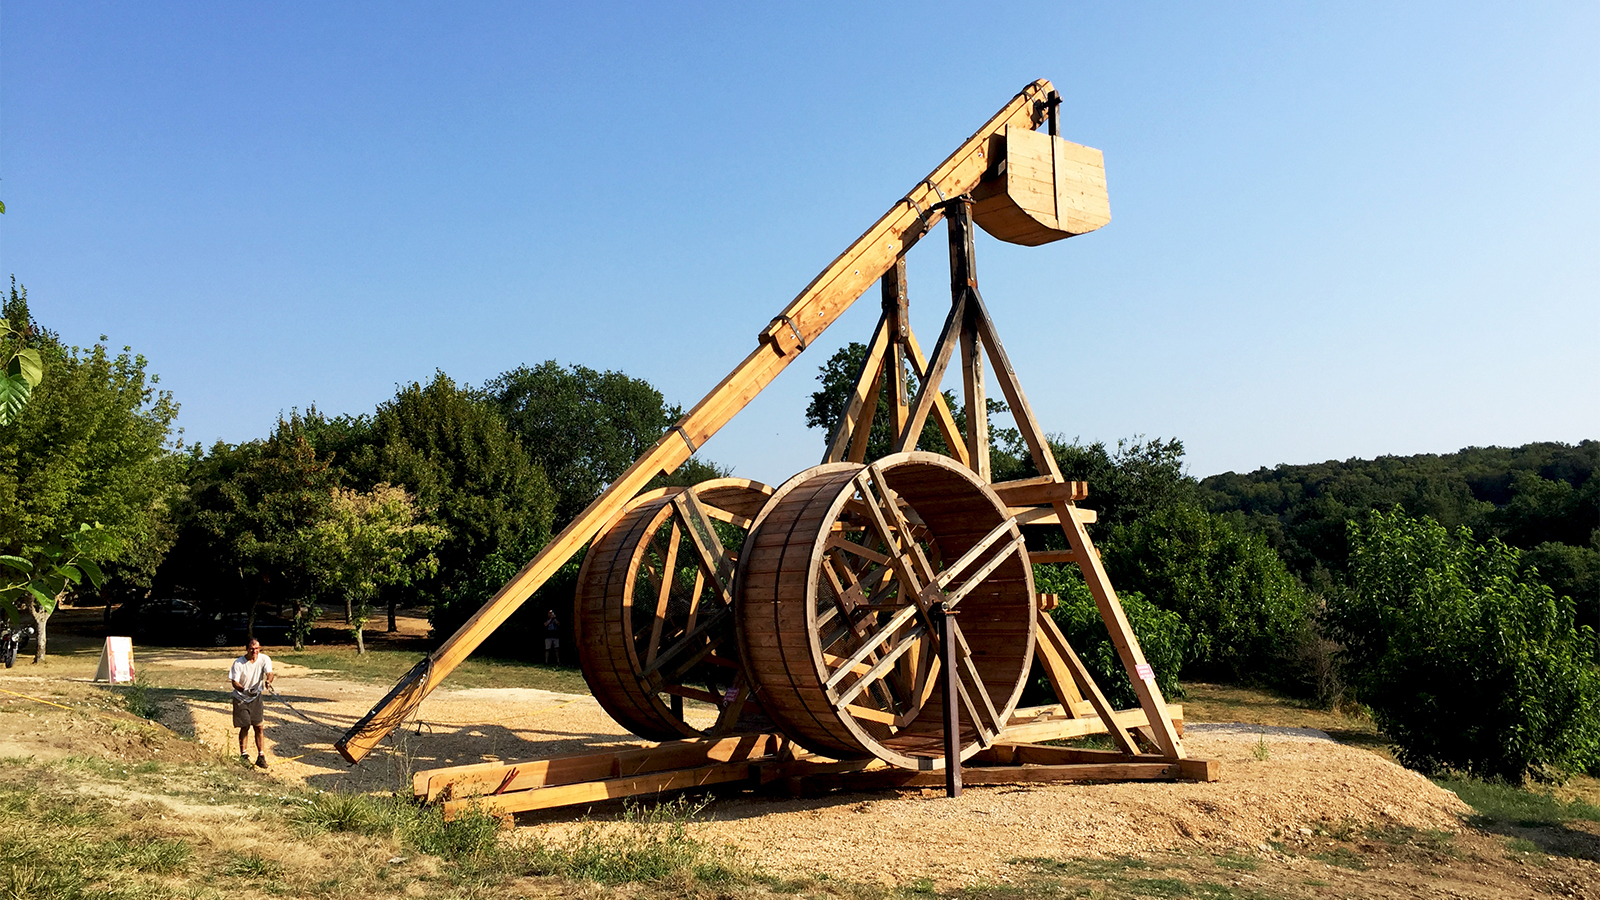 creative ways to die - Trebucheted from a high mountain